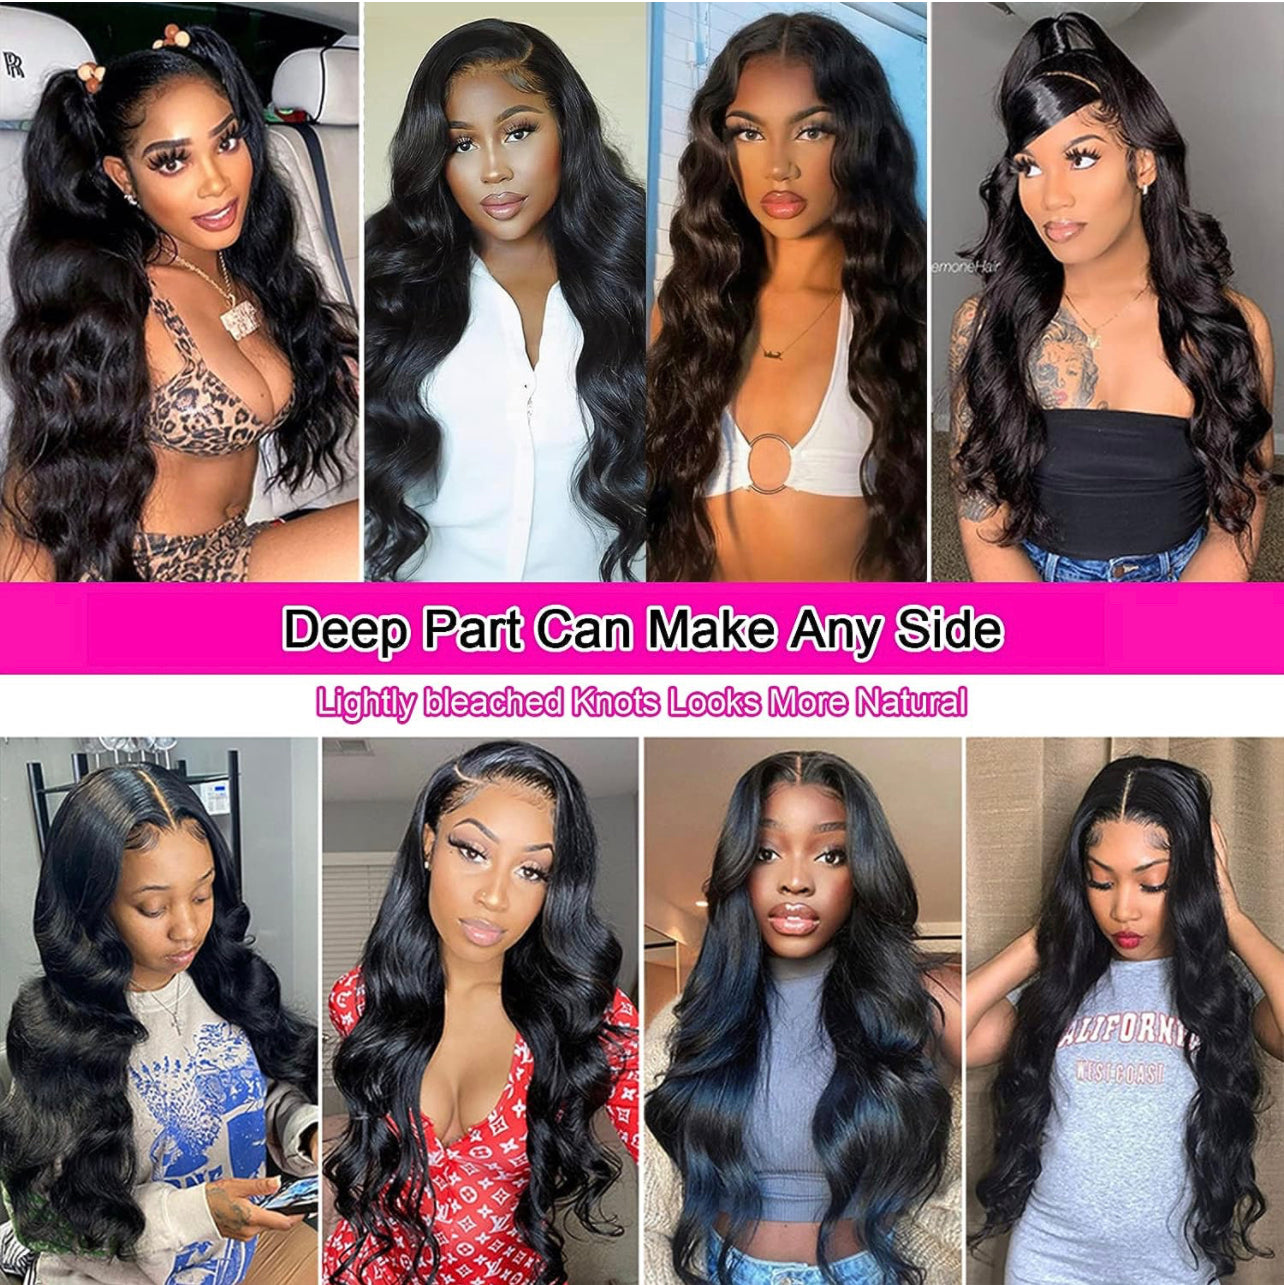 Laboss beauty HD Lace Front Wig - 13x6 Lace Frontal, Pre Plucked Knots, Baby Hair - 180 Density Brazilian Wig for Women (26 Inch, Natural Color)